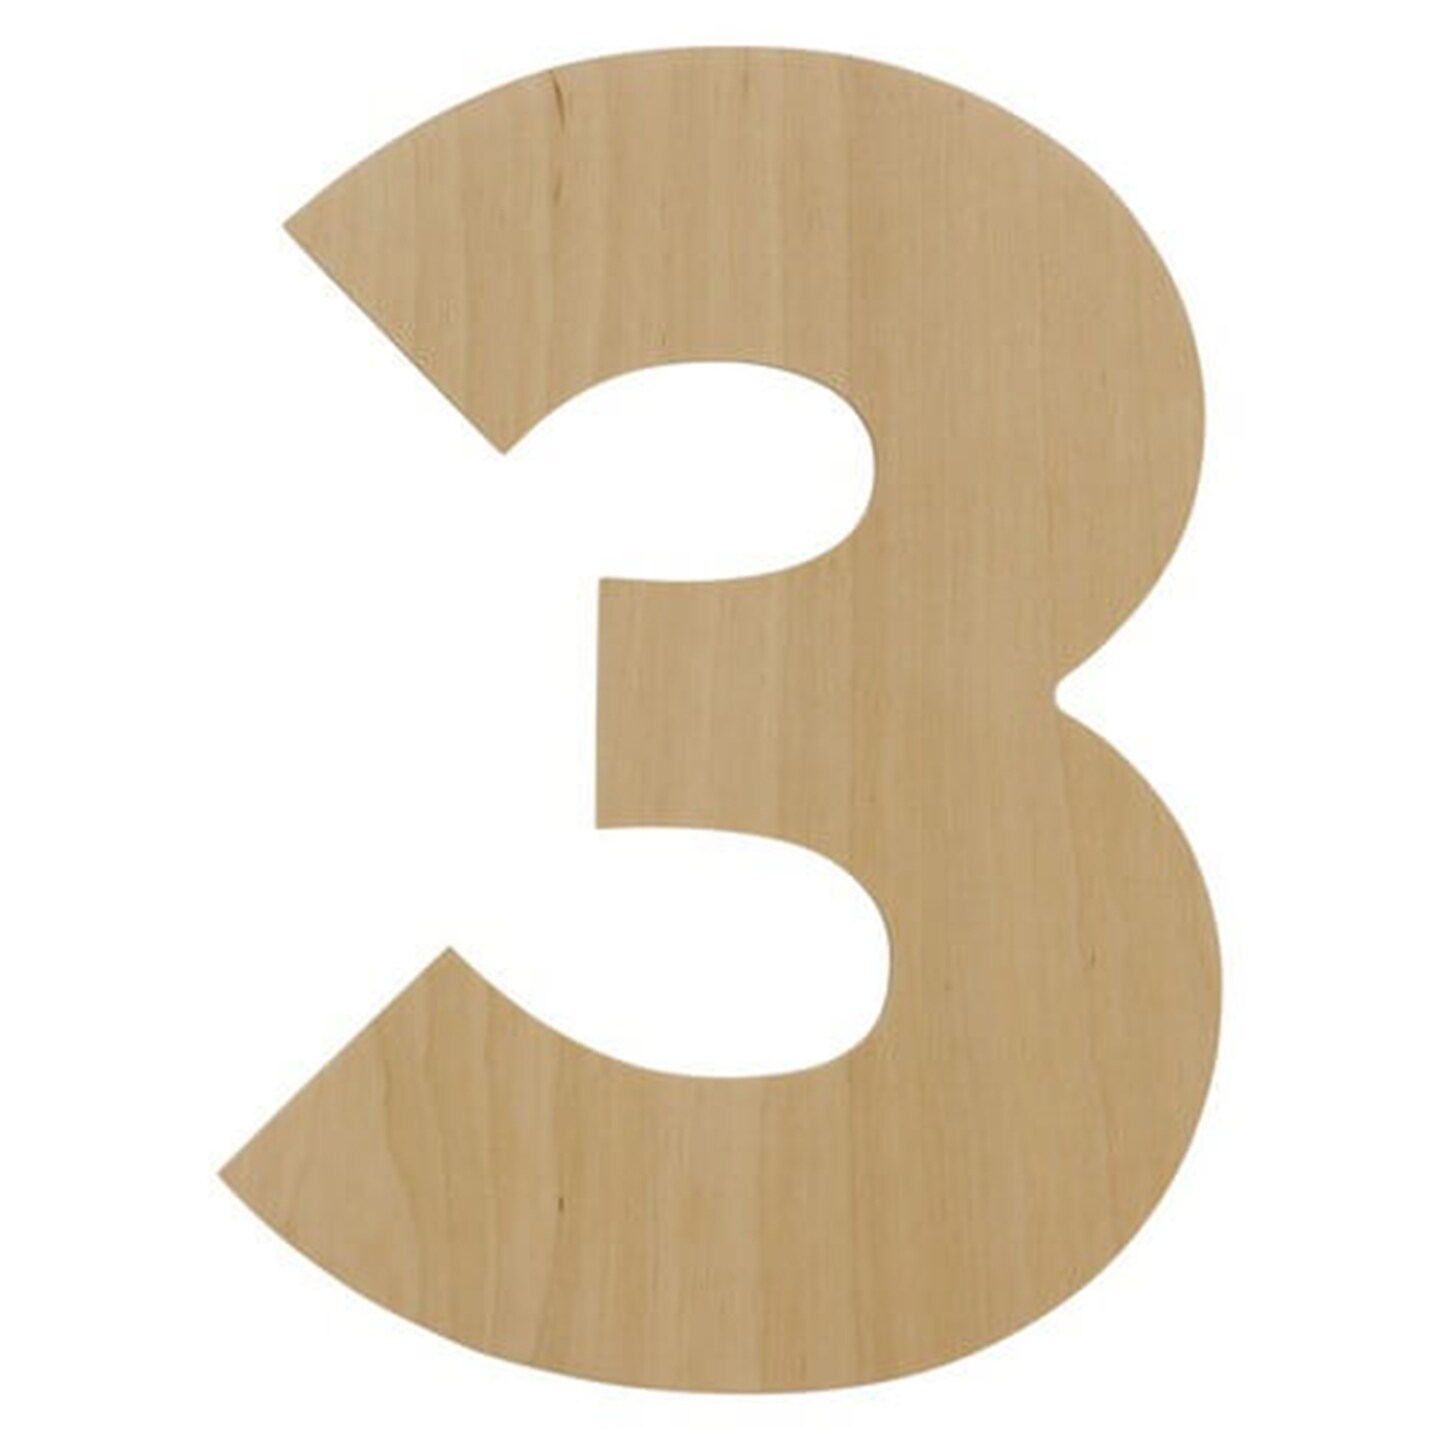 Wooden Number 3, 12 inch or 8 inch, Unfinished Large Wood Numbers for Crafts | Woodpeckers